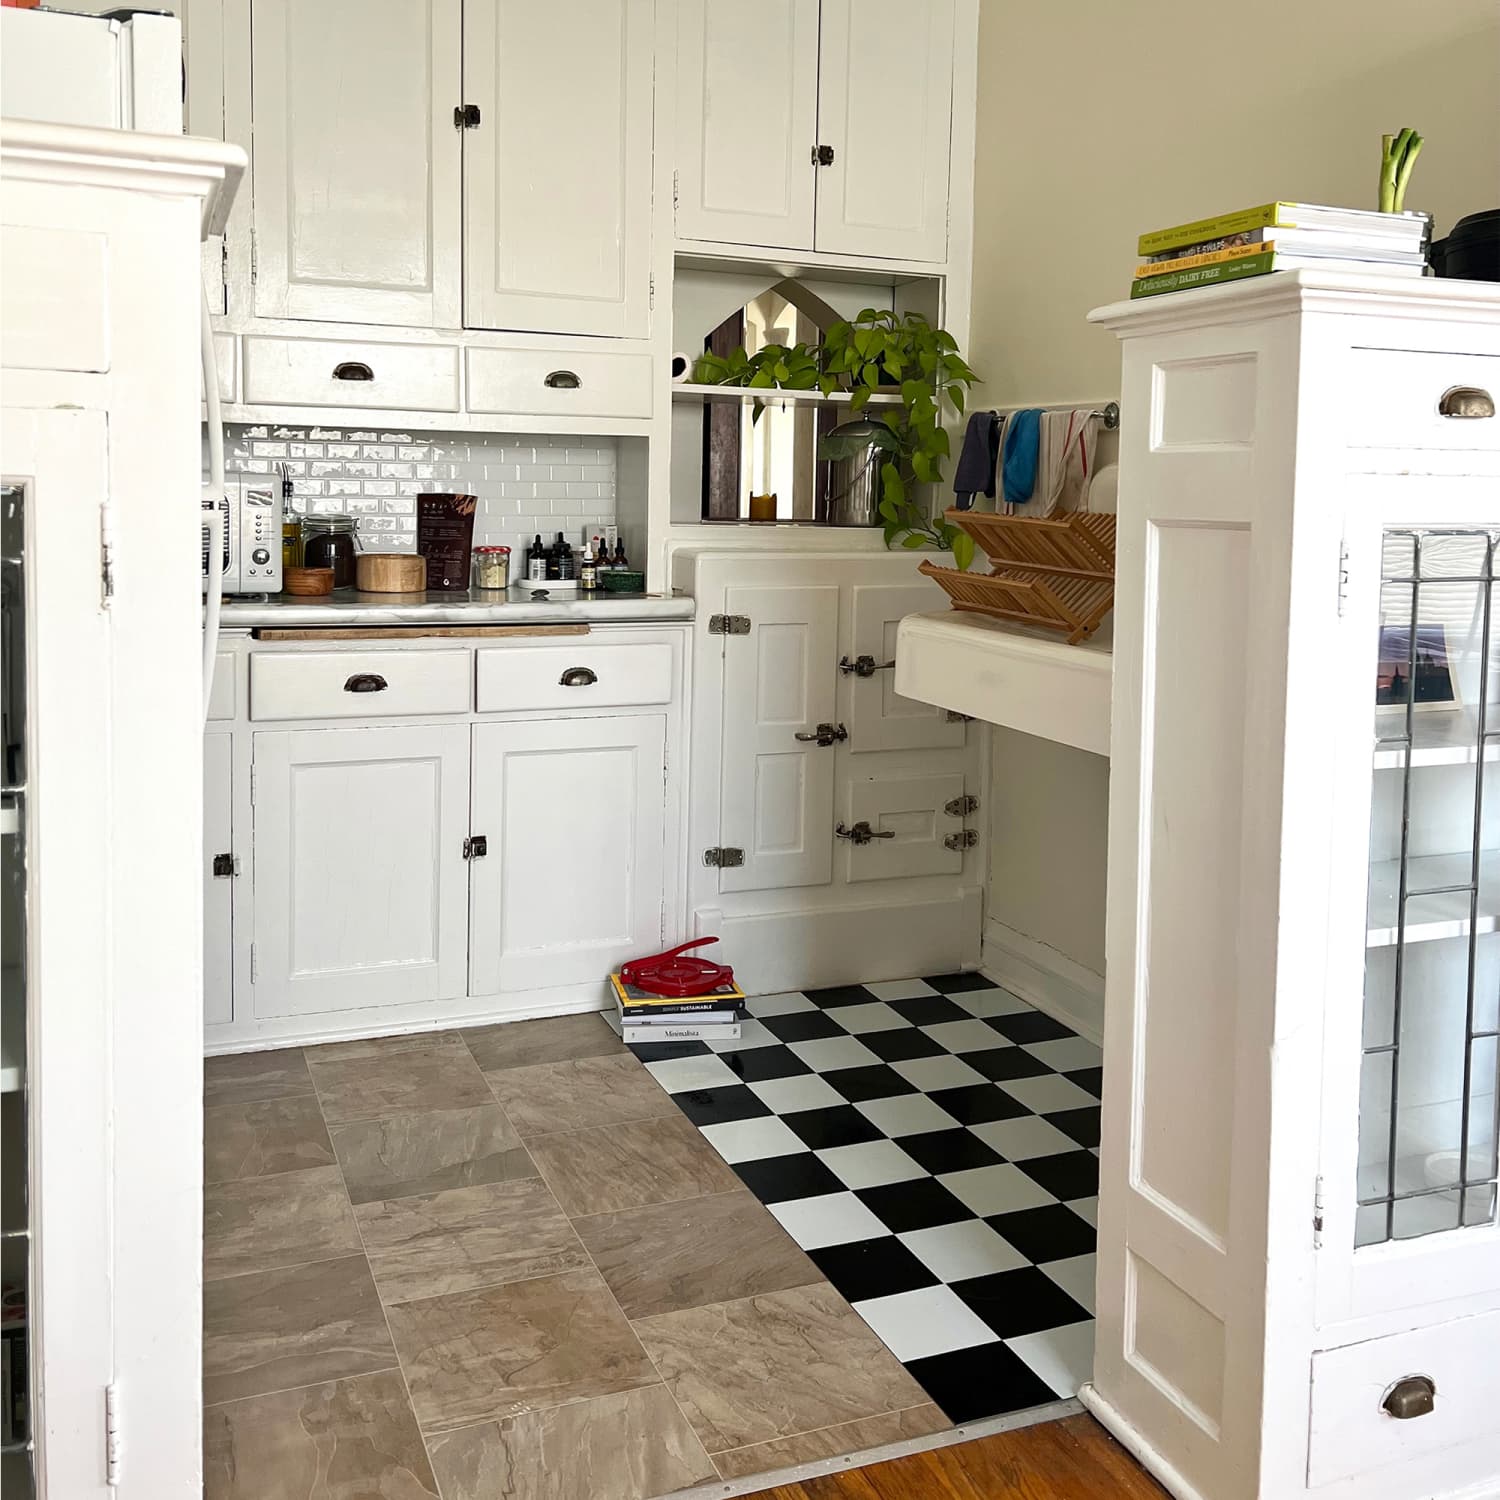 How This Renter Installed Peel-and-Stick Kitchen Floor Tiles